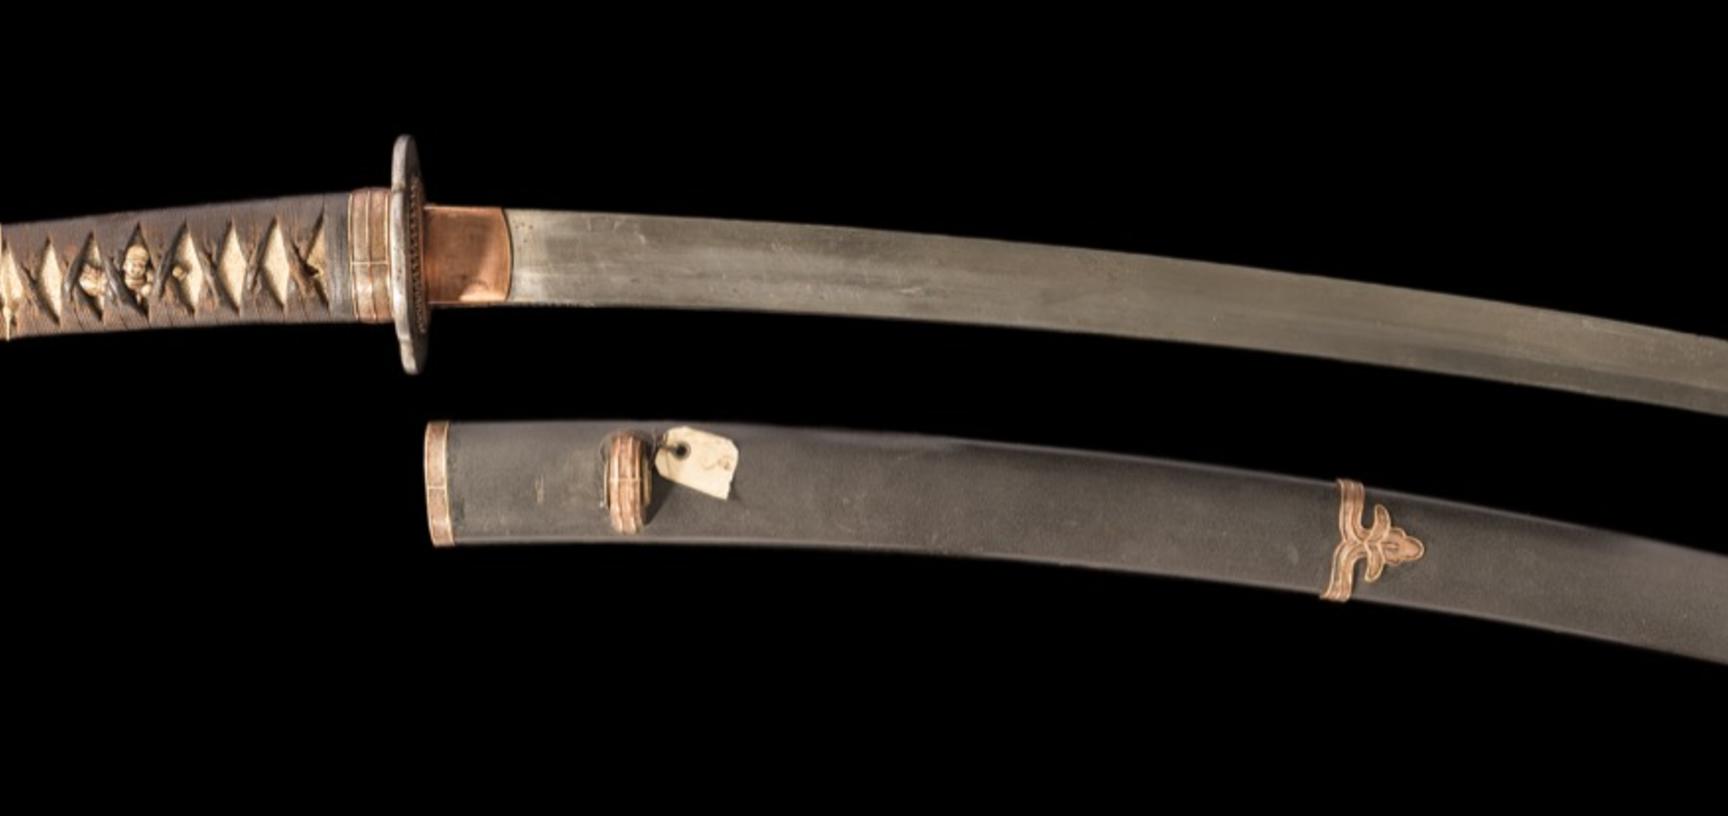 Wakizashi, or Japanese short sword, typically carried by samurai as one of a pair of blades (daishō). This sword was part of Lieutenant-General Pitt Rivers’ founding collection, originally displayed in Bethnal Green Museum and transferred from South Kensi